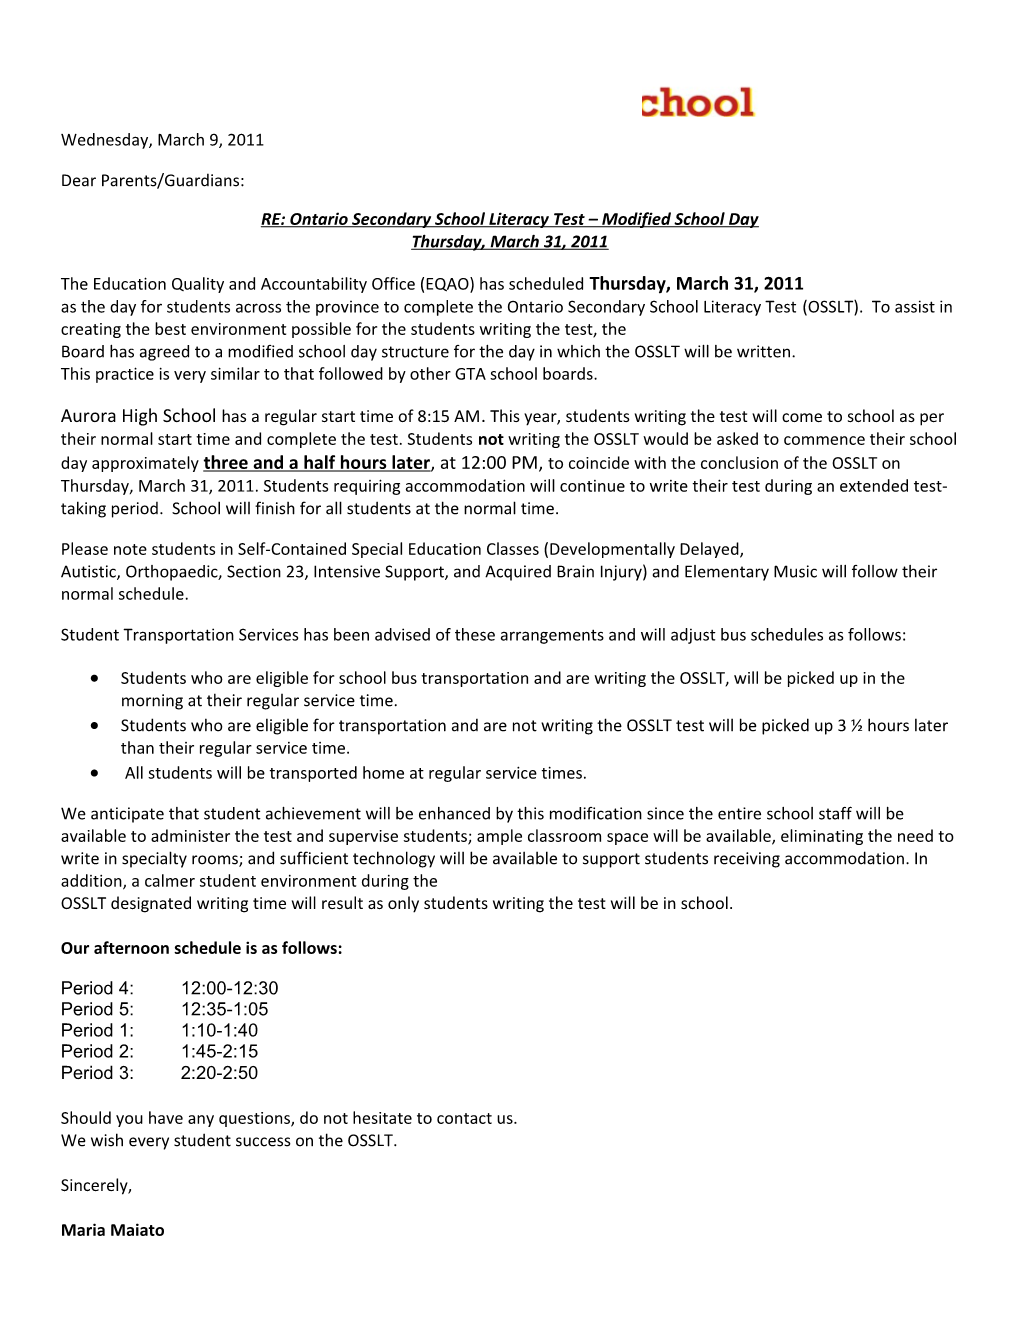 OSSLT, March 2011: Modified School Day Letter